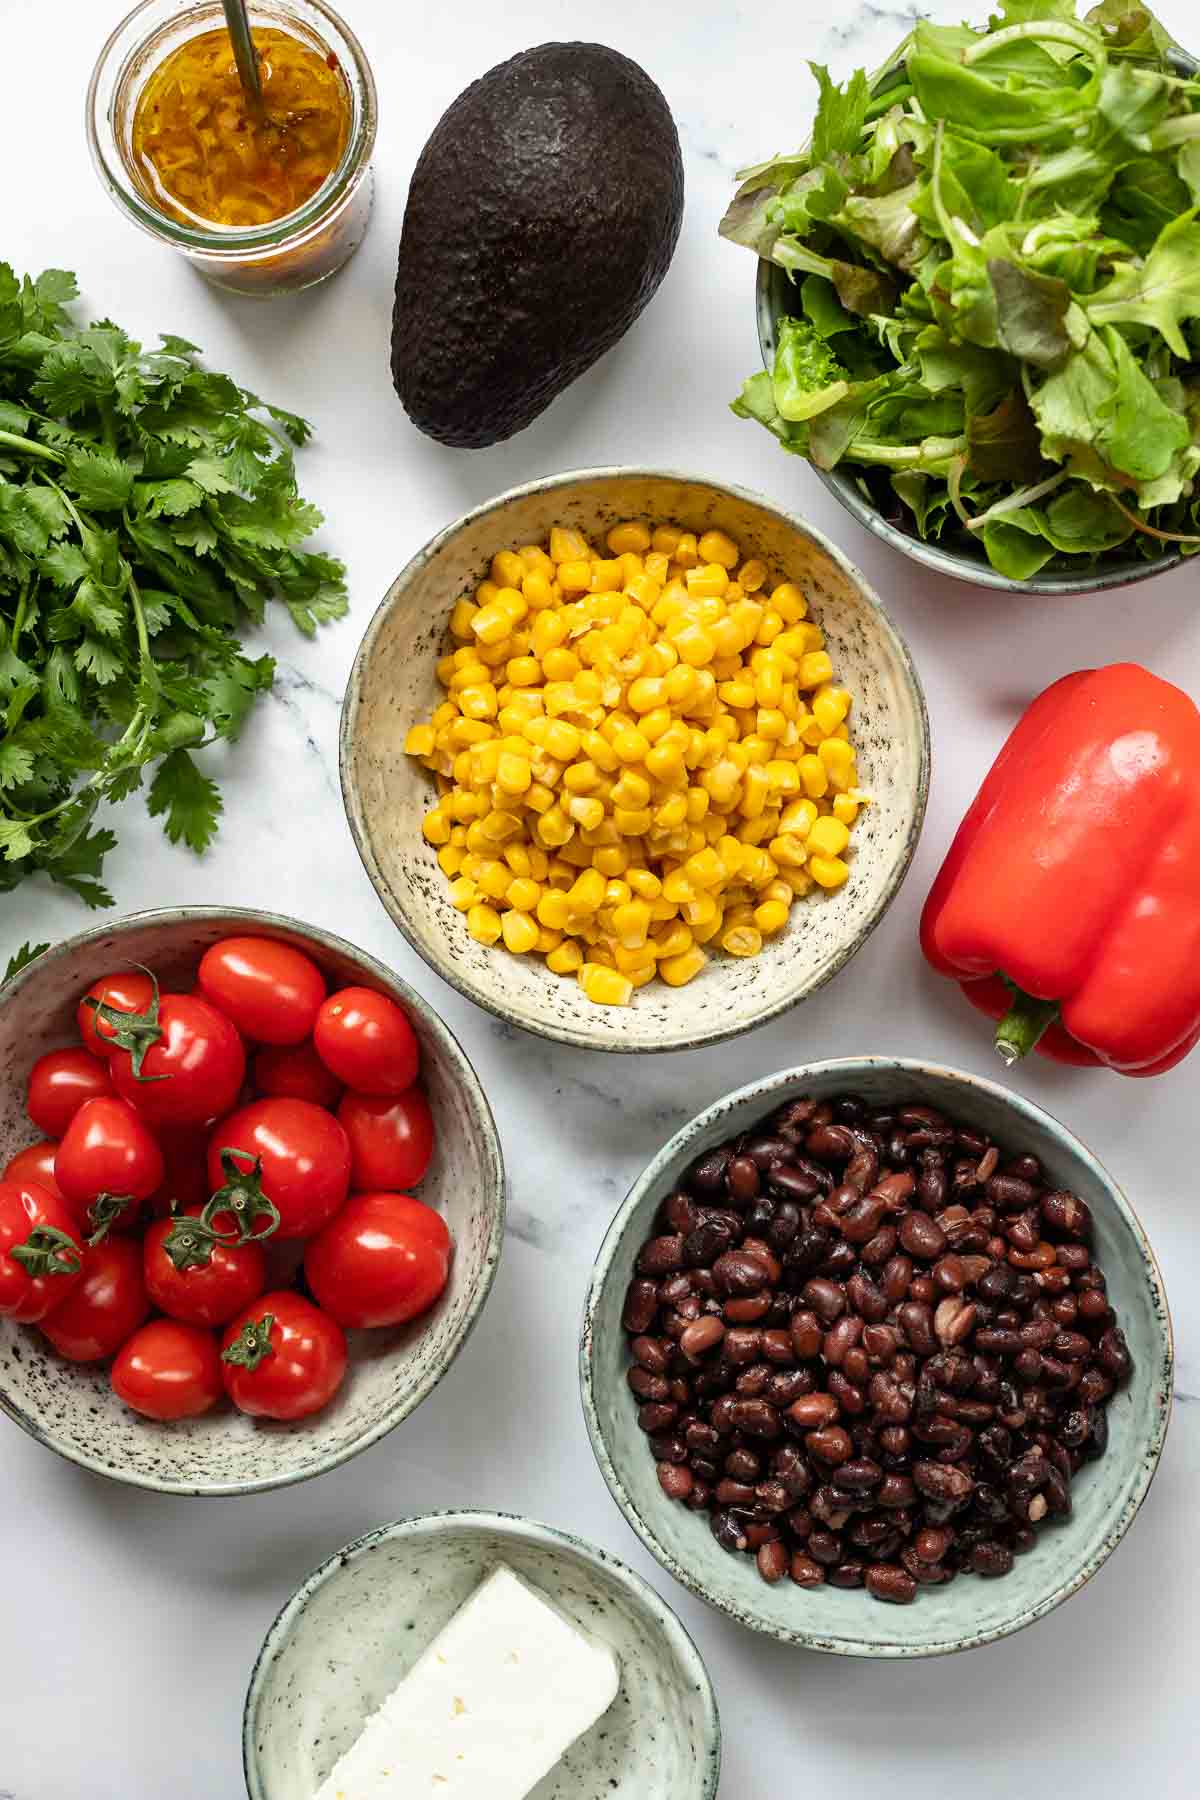 Ingredients for salad with black beans